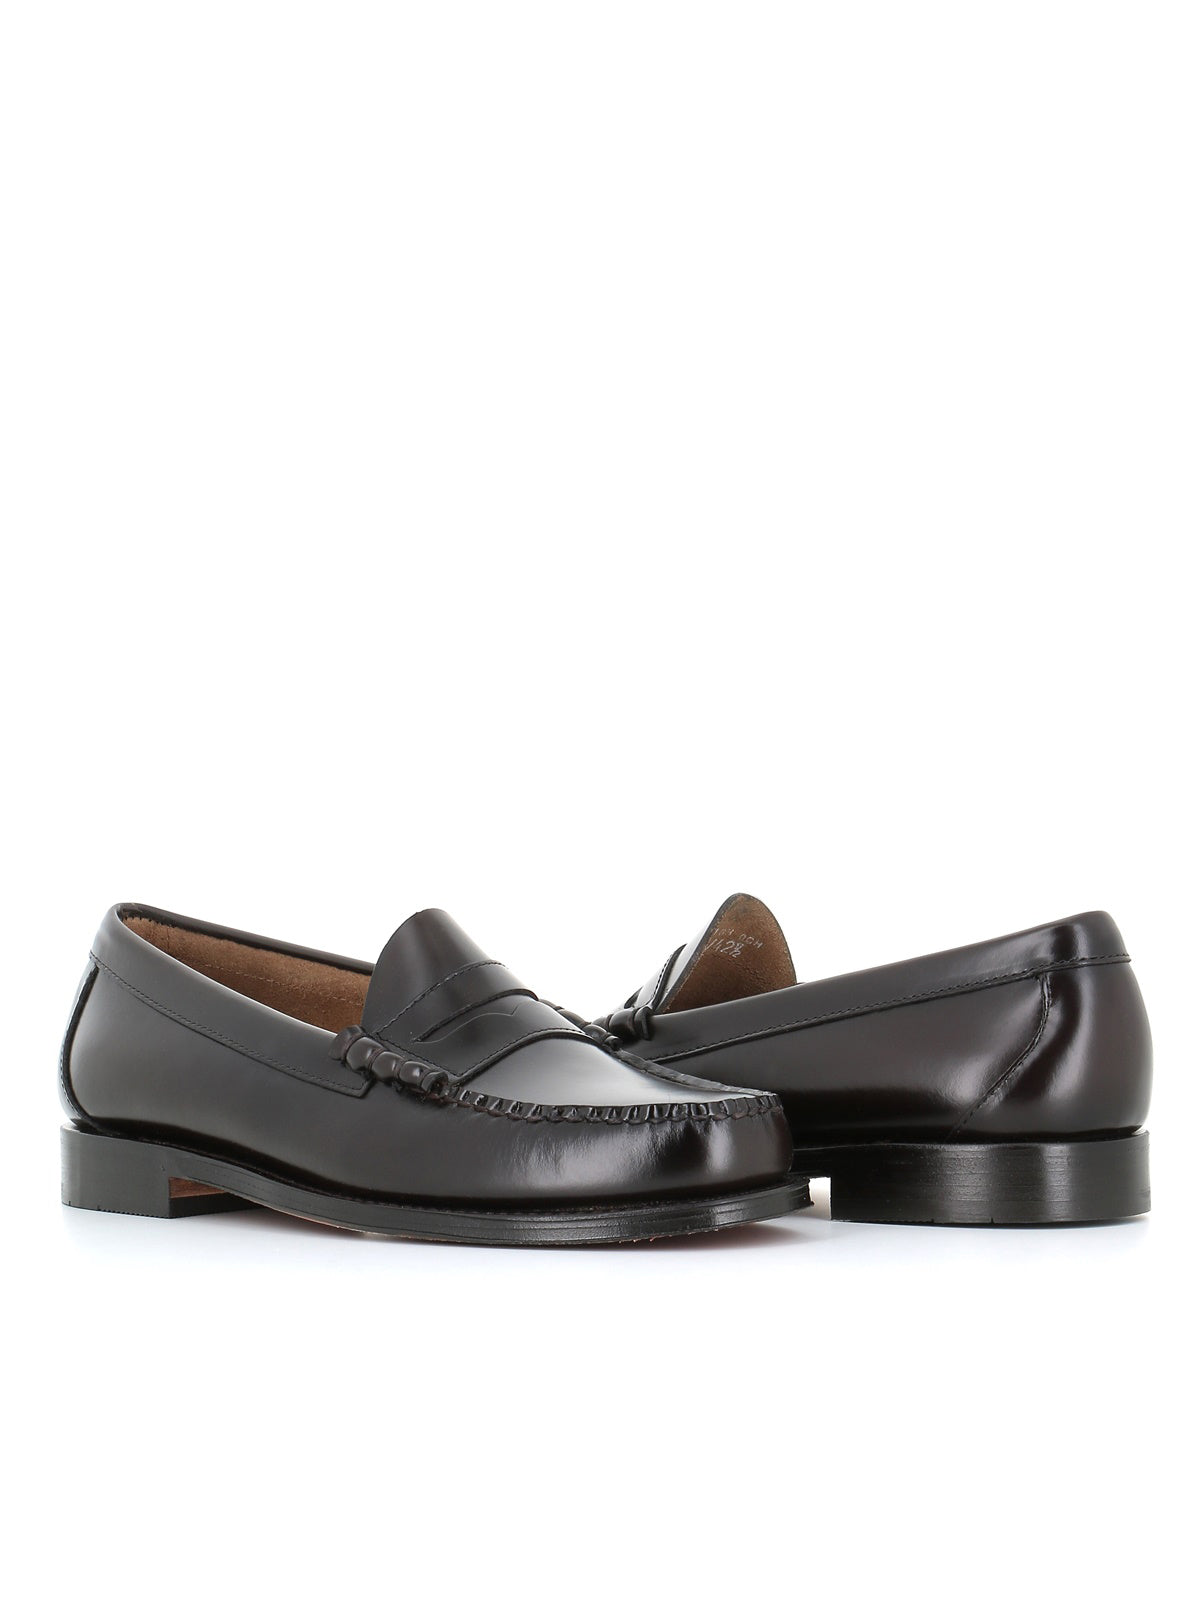  Loafer Larson Weejuns By G.h Bass & Co. Uomo Marrone - 2